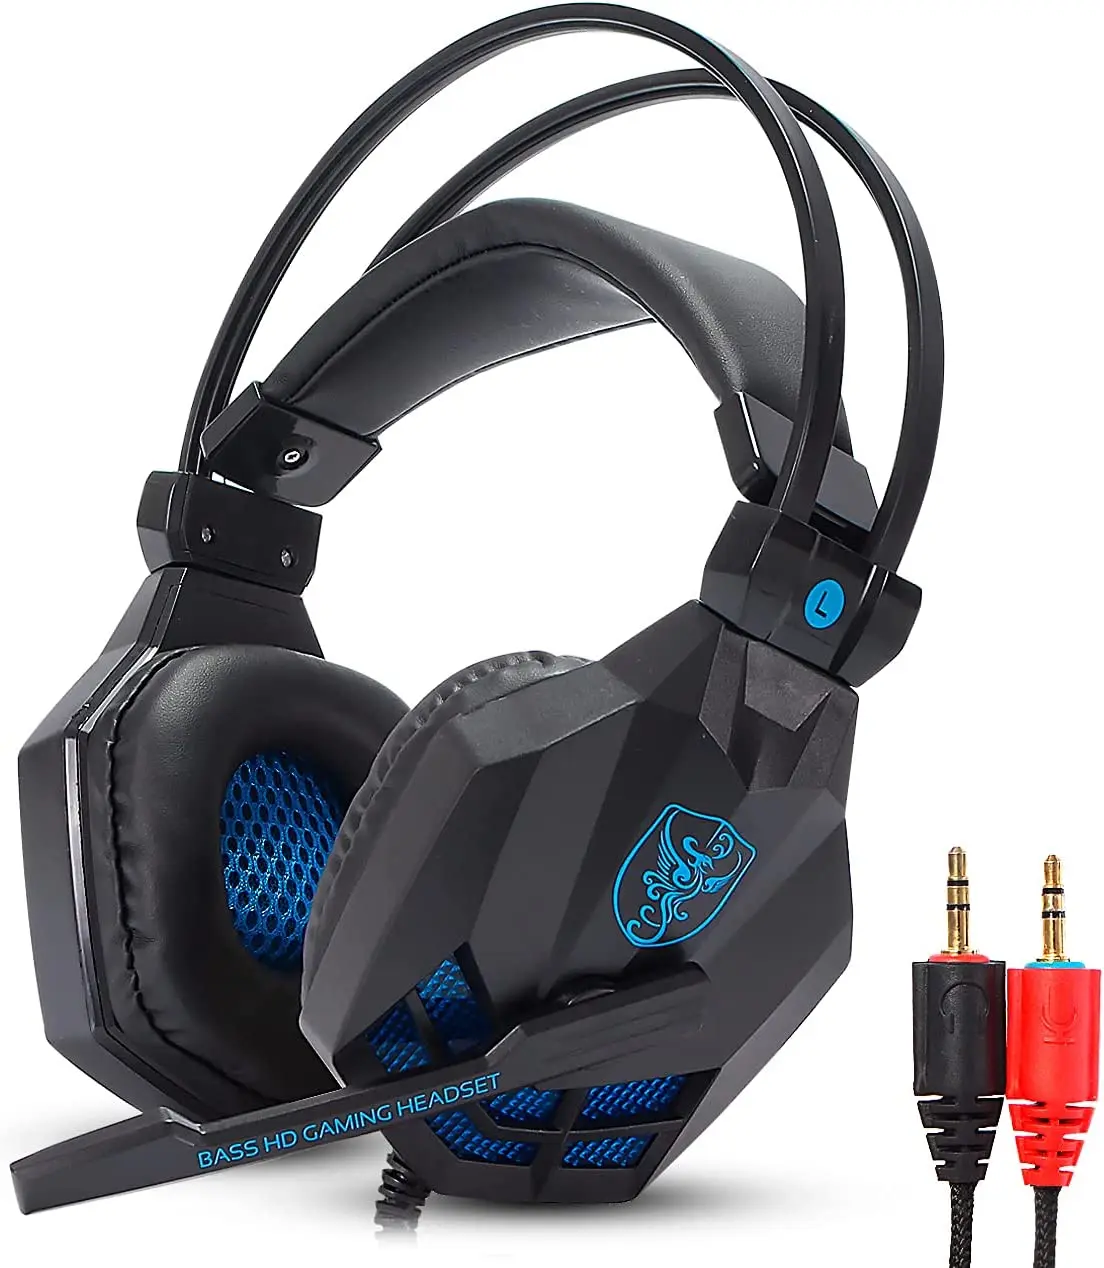 

Super HD P2 5.1 Estéreo Gamer Headset with Microphone for PC,Mac,Xbox One,Xbox Series X and S,PS4 and PS5.